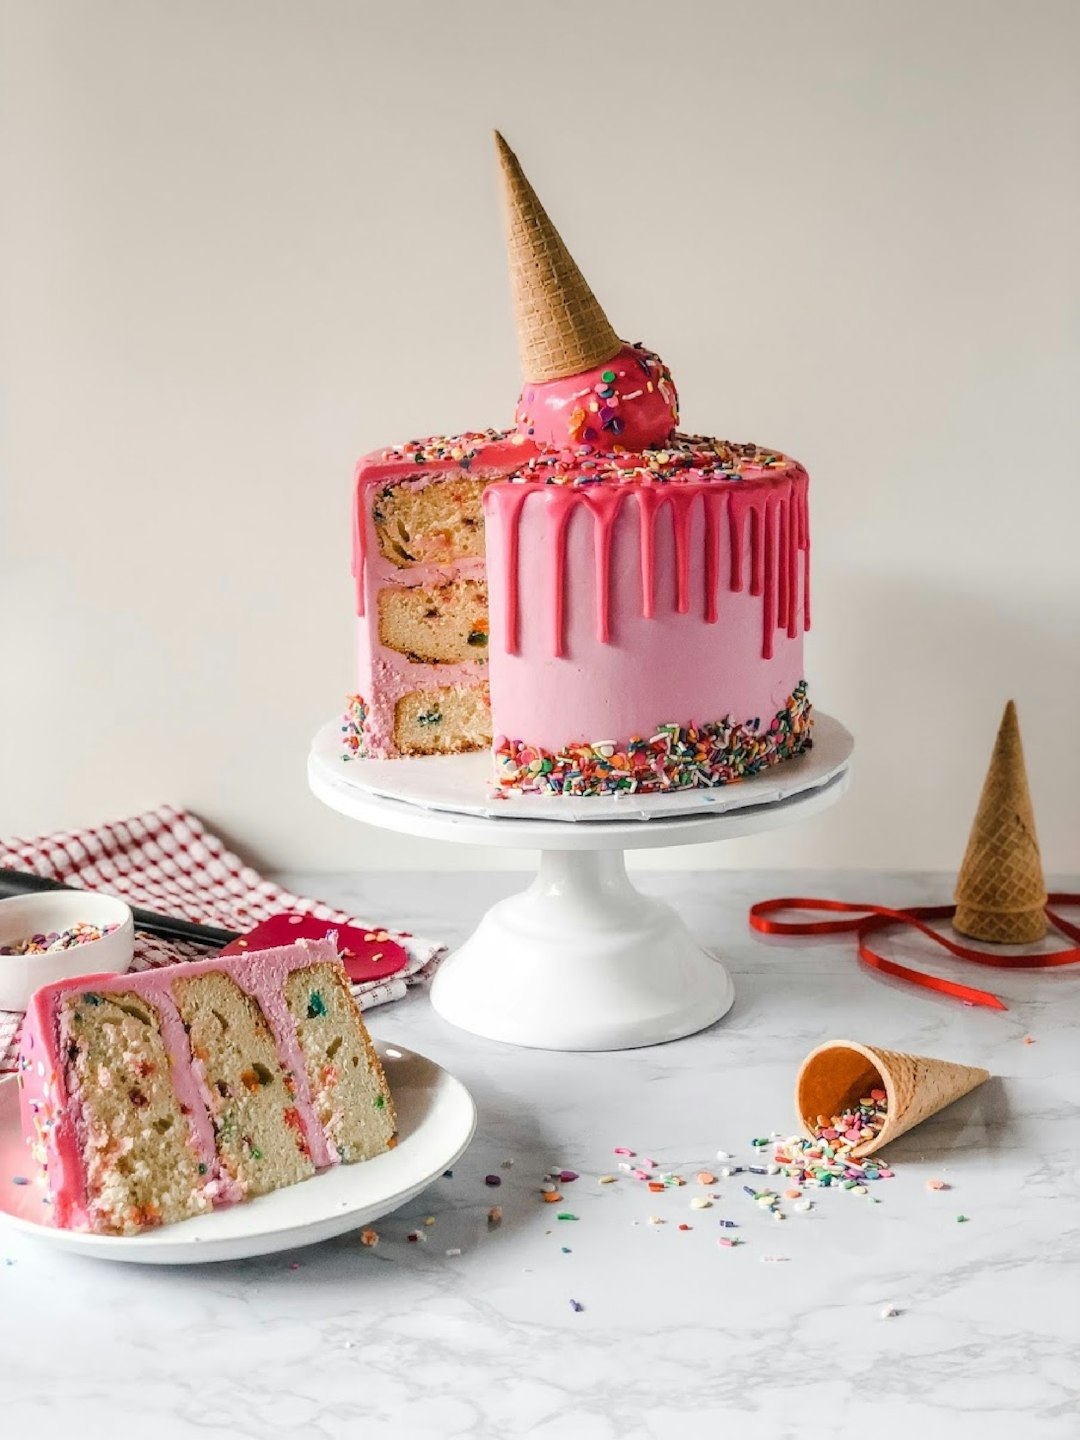 Unveiling 10 Fun Facts About Birthday Cakes You Didn't Know